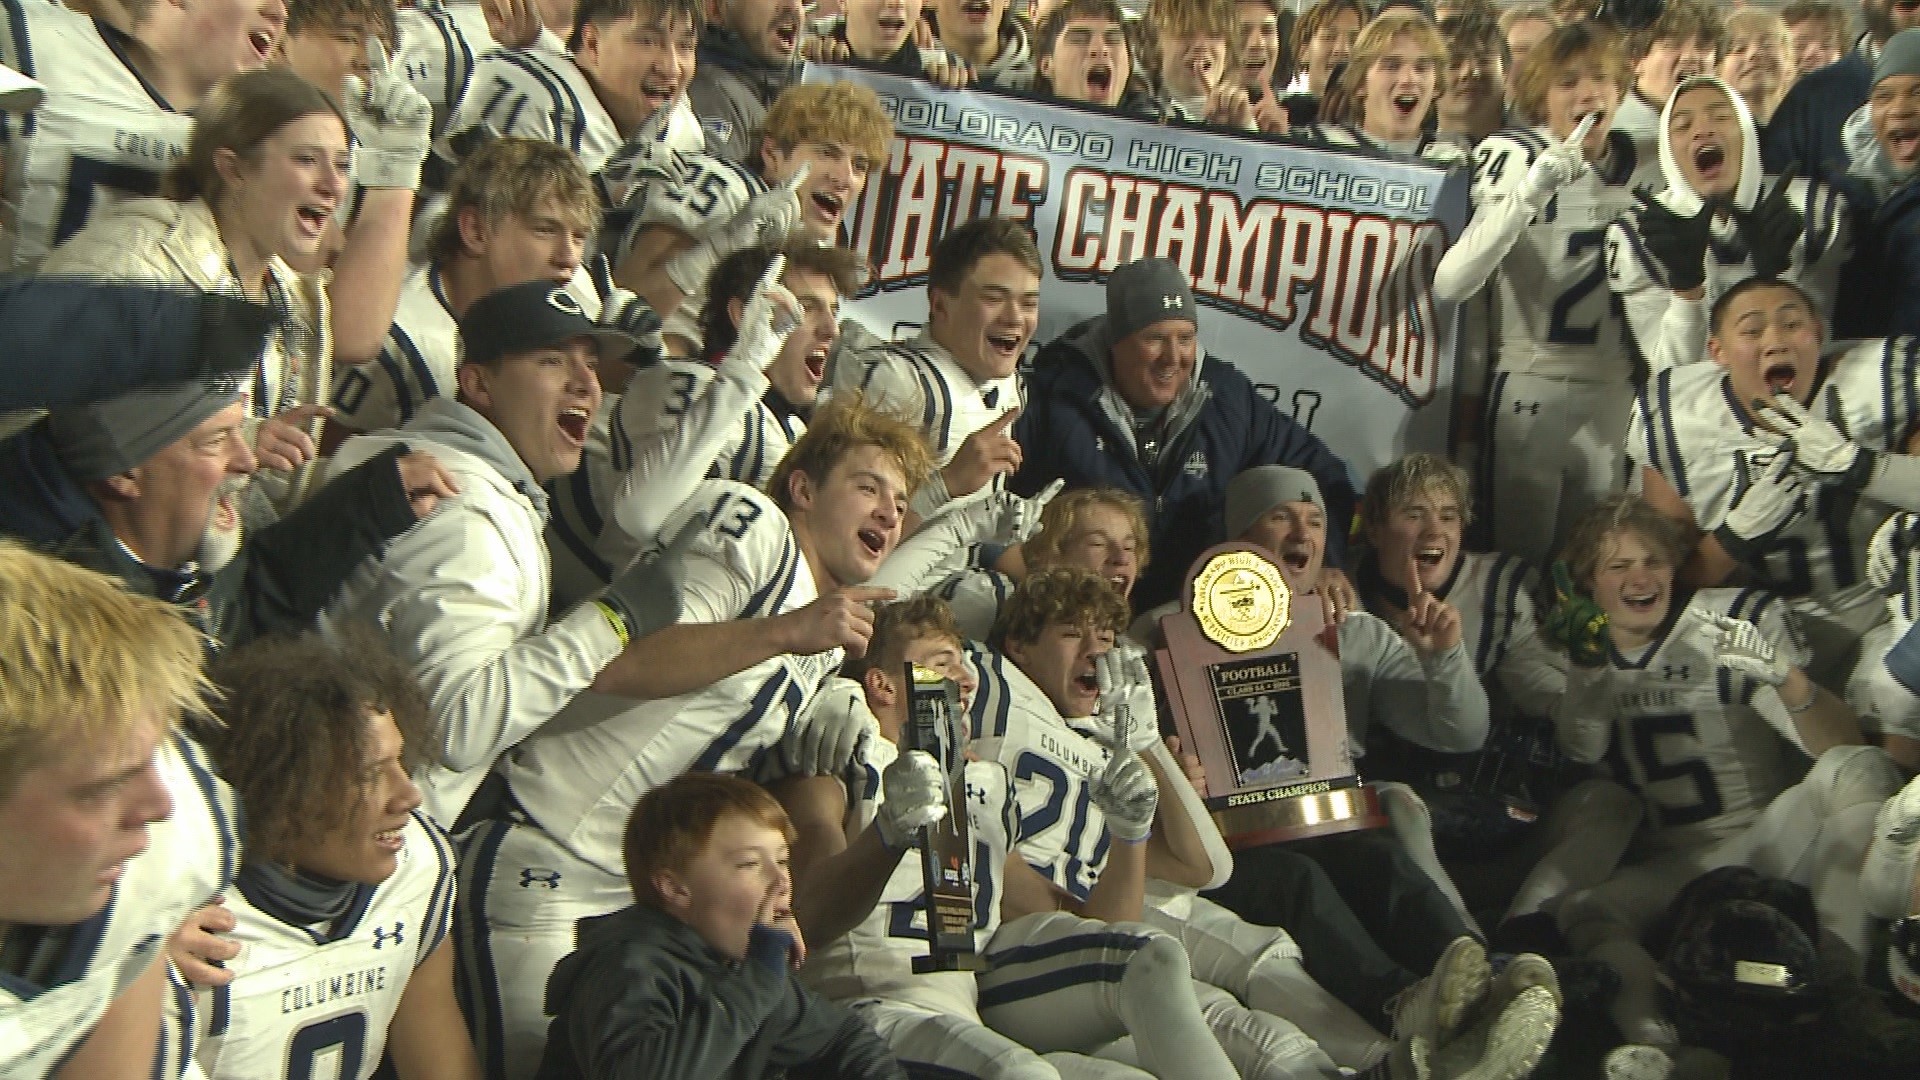 The Rebels captured their first state title in 12 years by defeating the four-time defending champion Bruins.